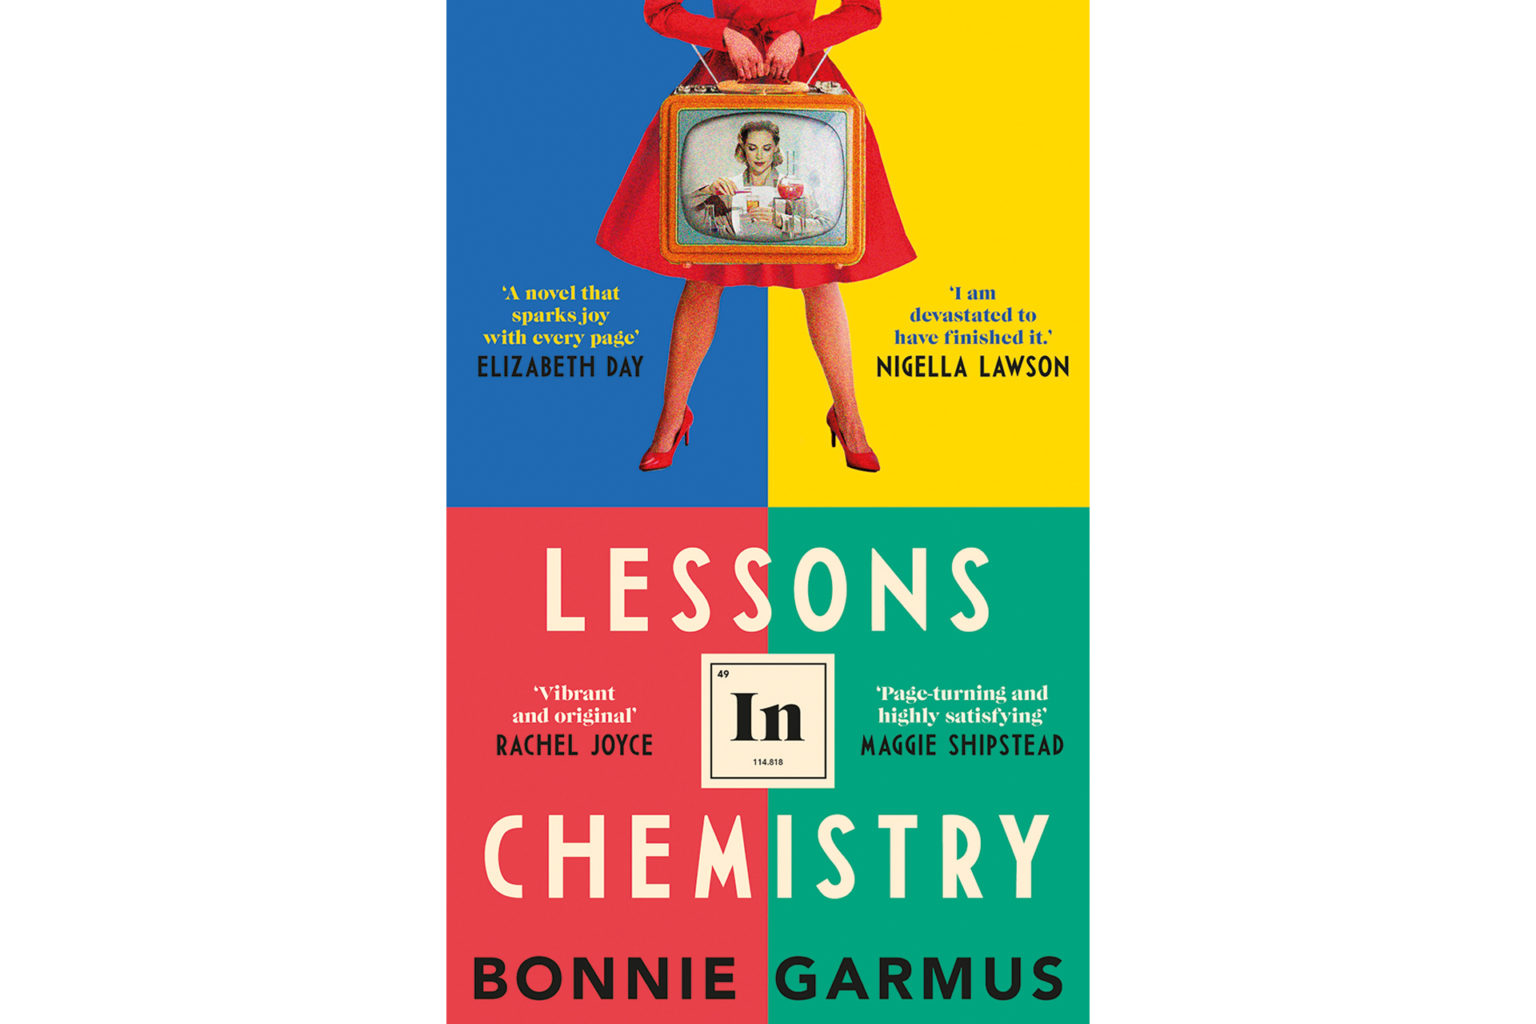 Bonnie Garmus on Lessons in Chemistry Interview Books